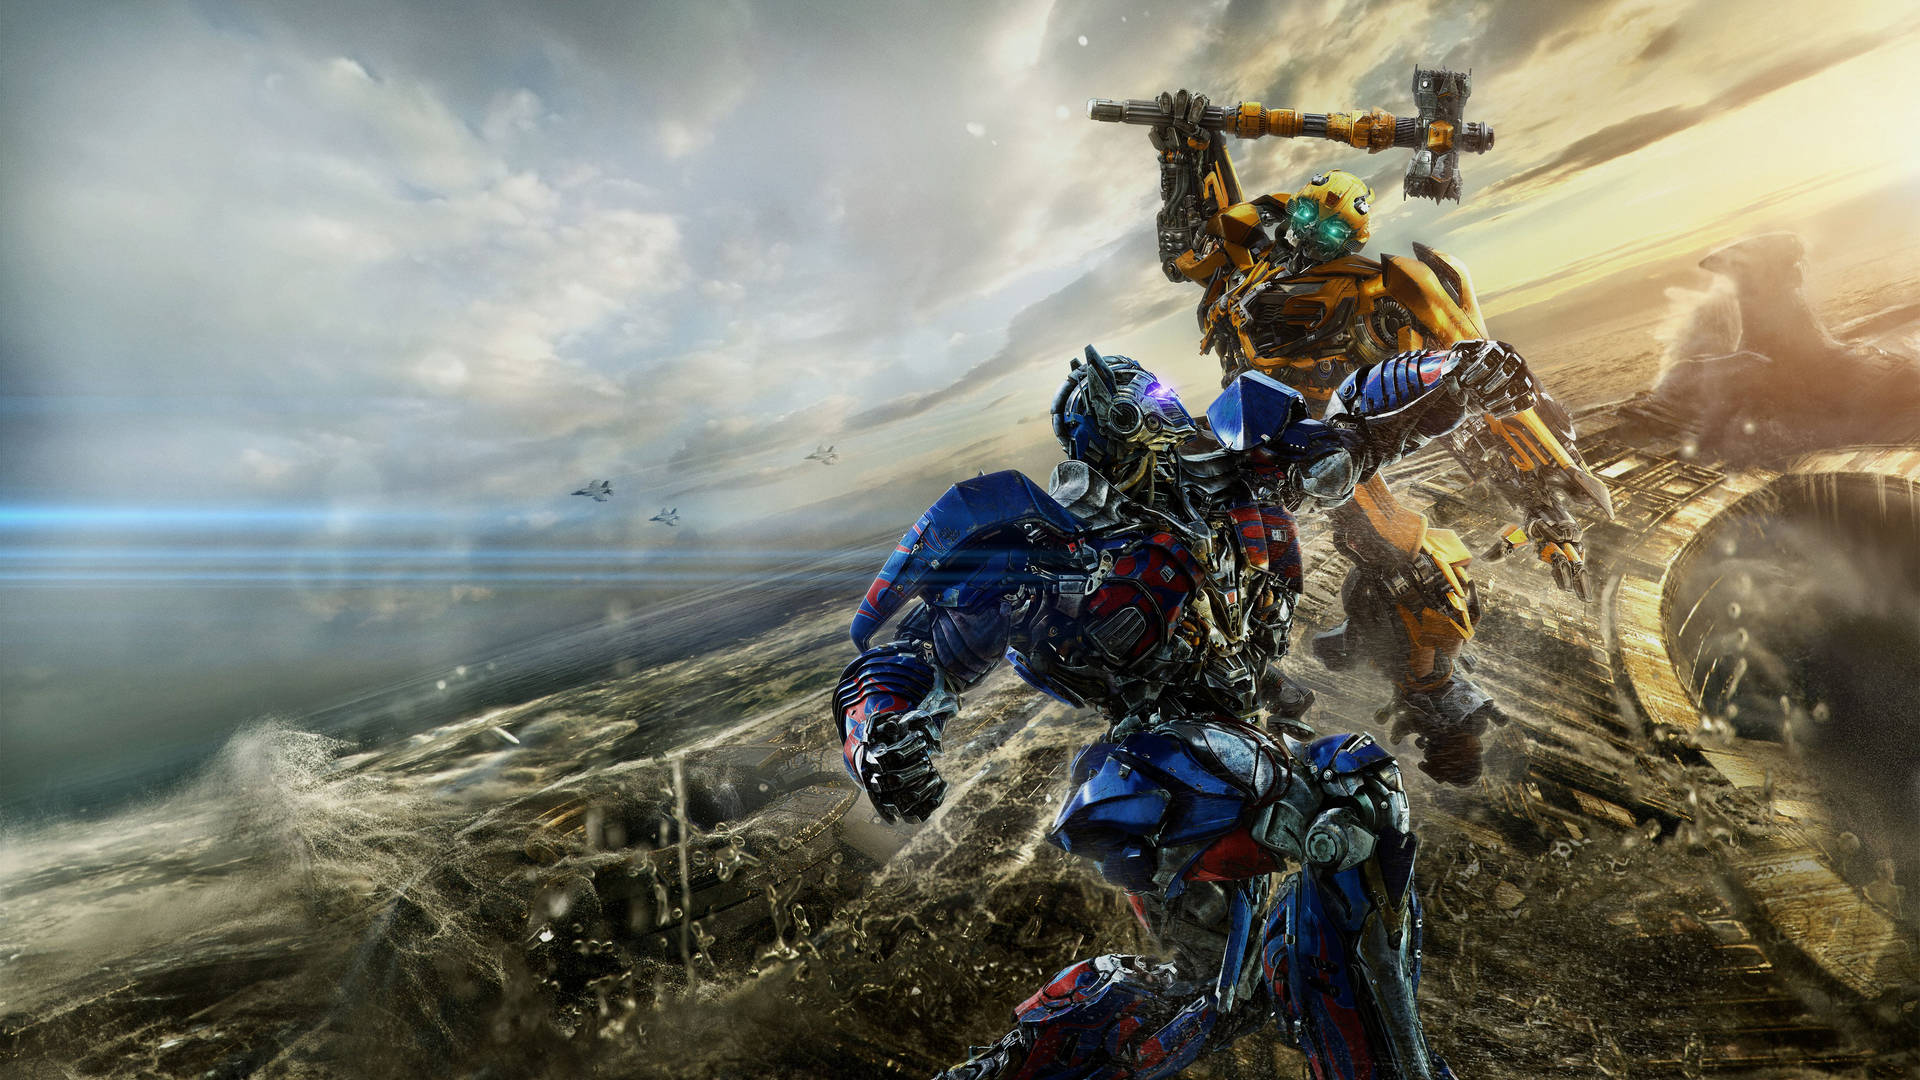 Transformers: The Last Knight Poster Background